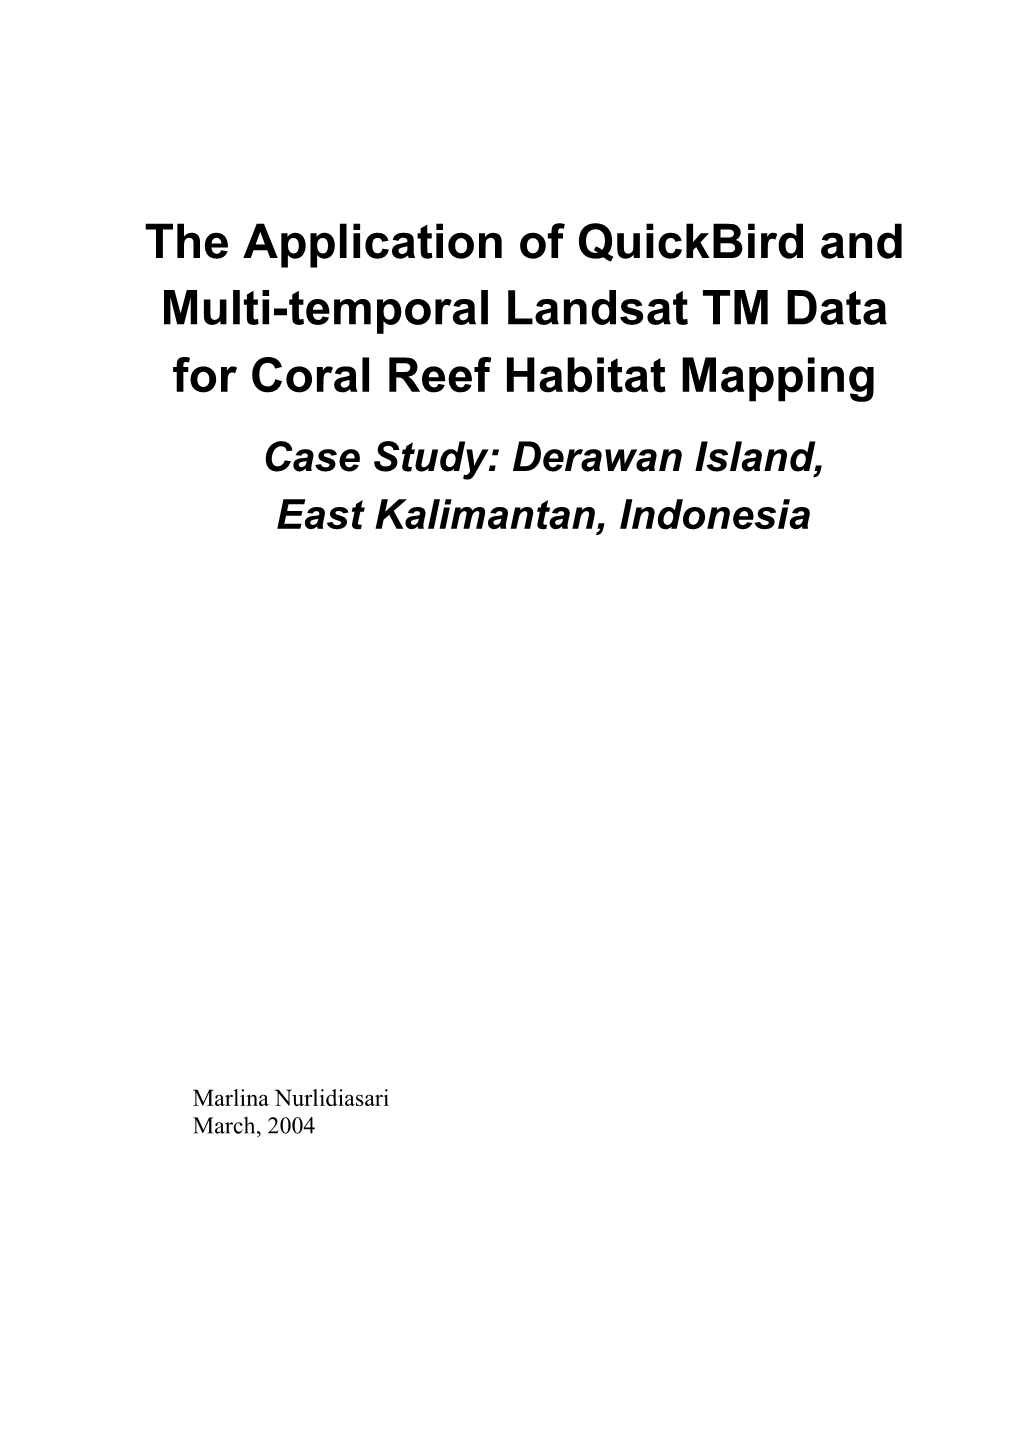 The Application of Quickbird and Multi-Temporal Landsat TM Data for Coral Reef Habitat Mapping Case Study: Derawan Island, East Kalimantan, Indonesia